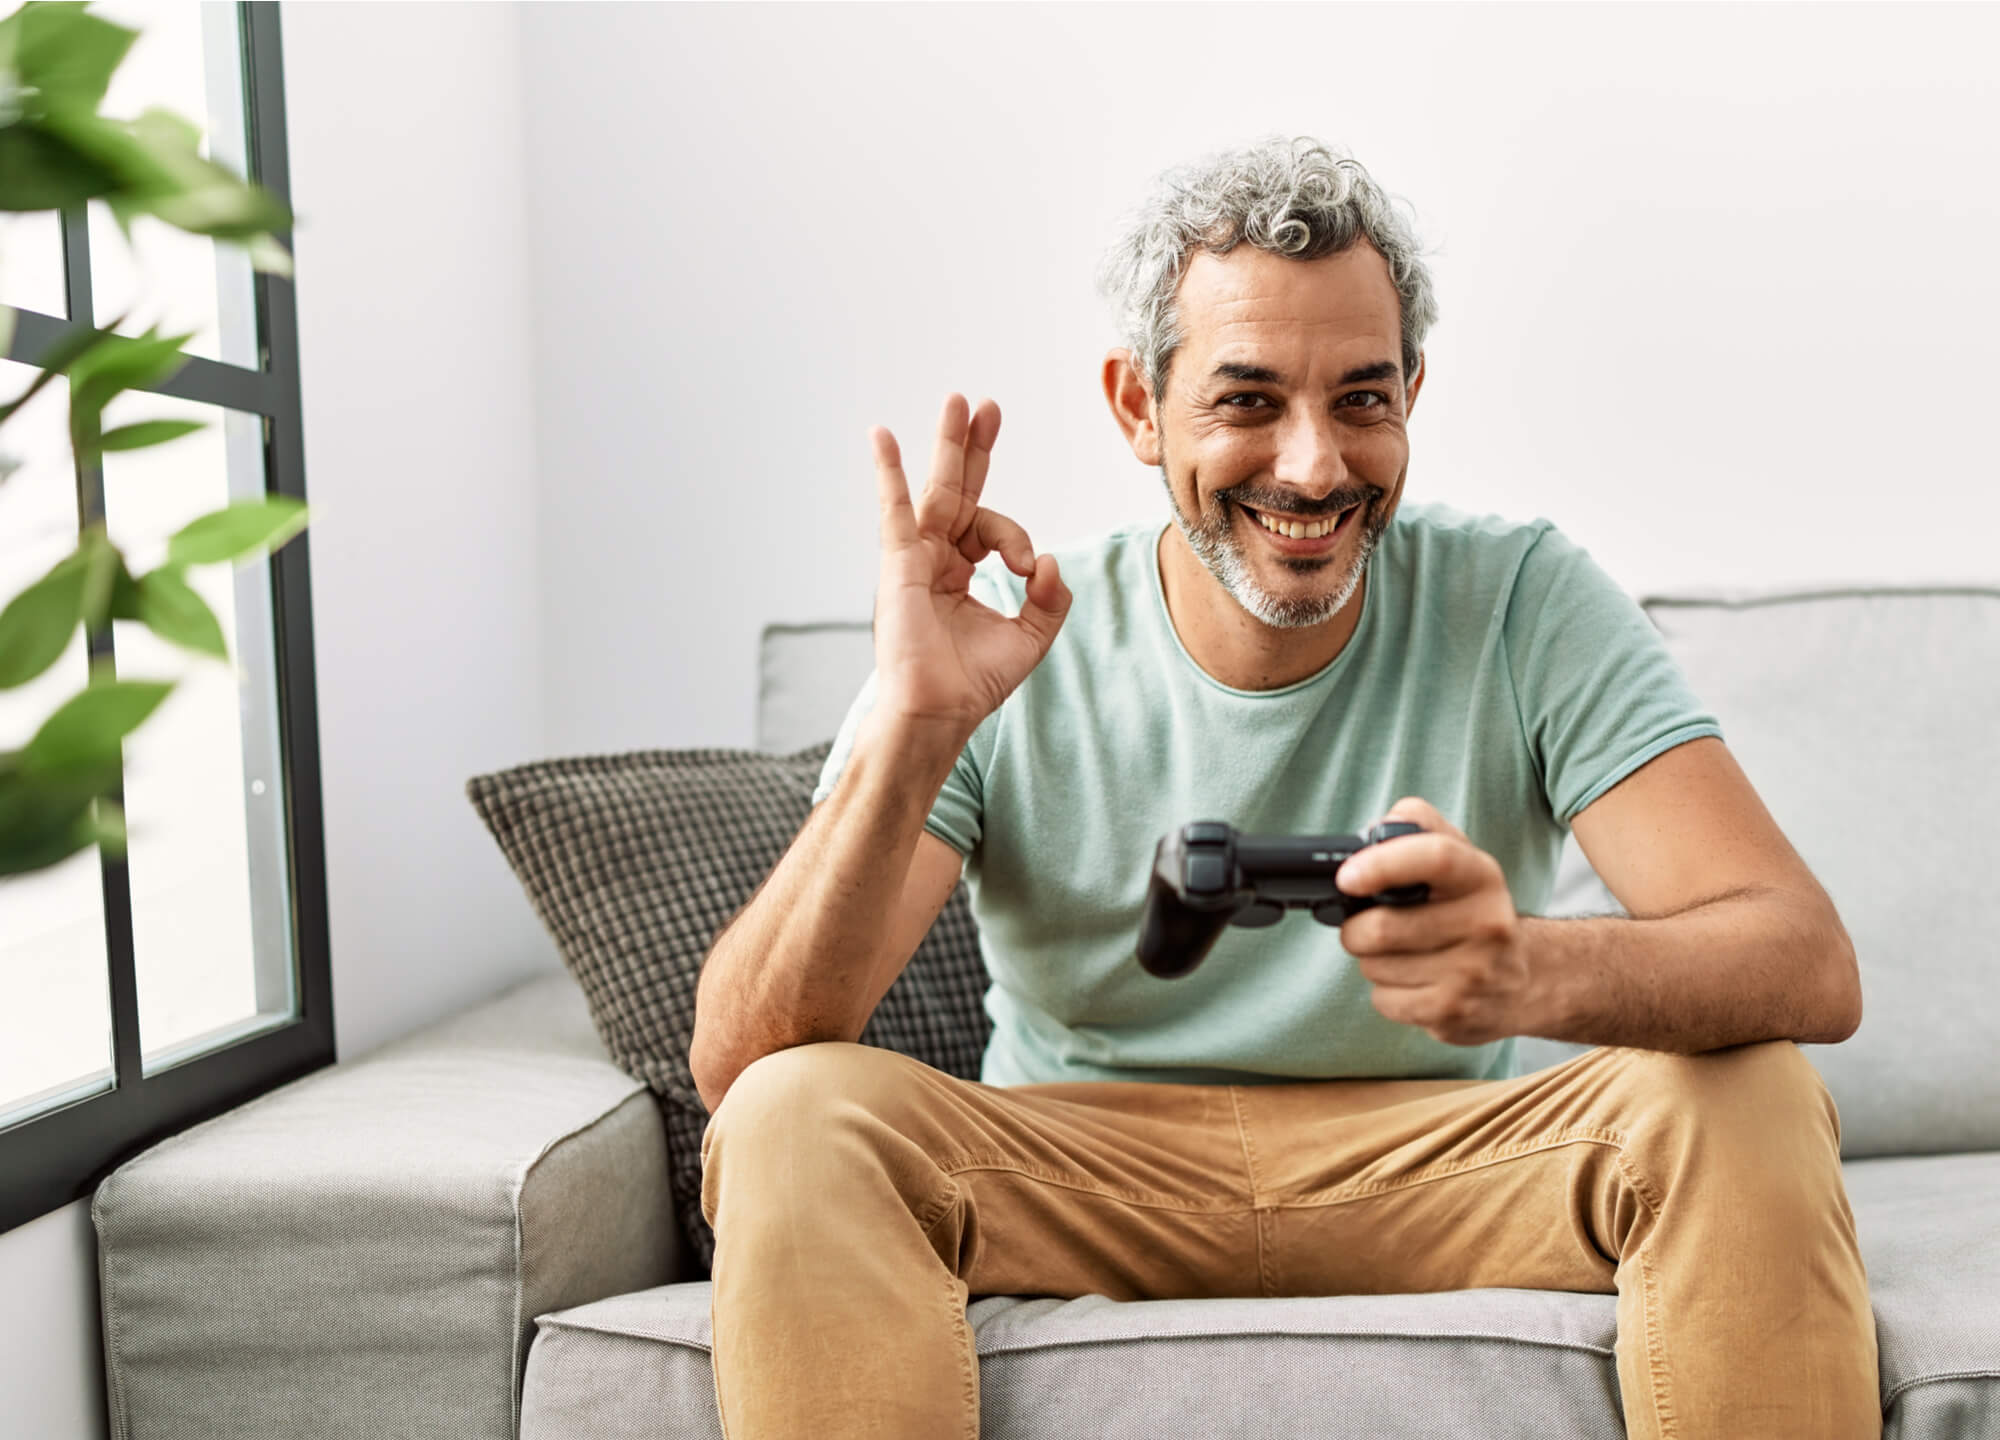 How Do Video Games Affect Our Cognition and Behavior?